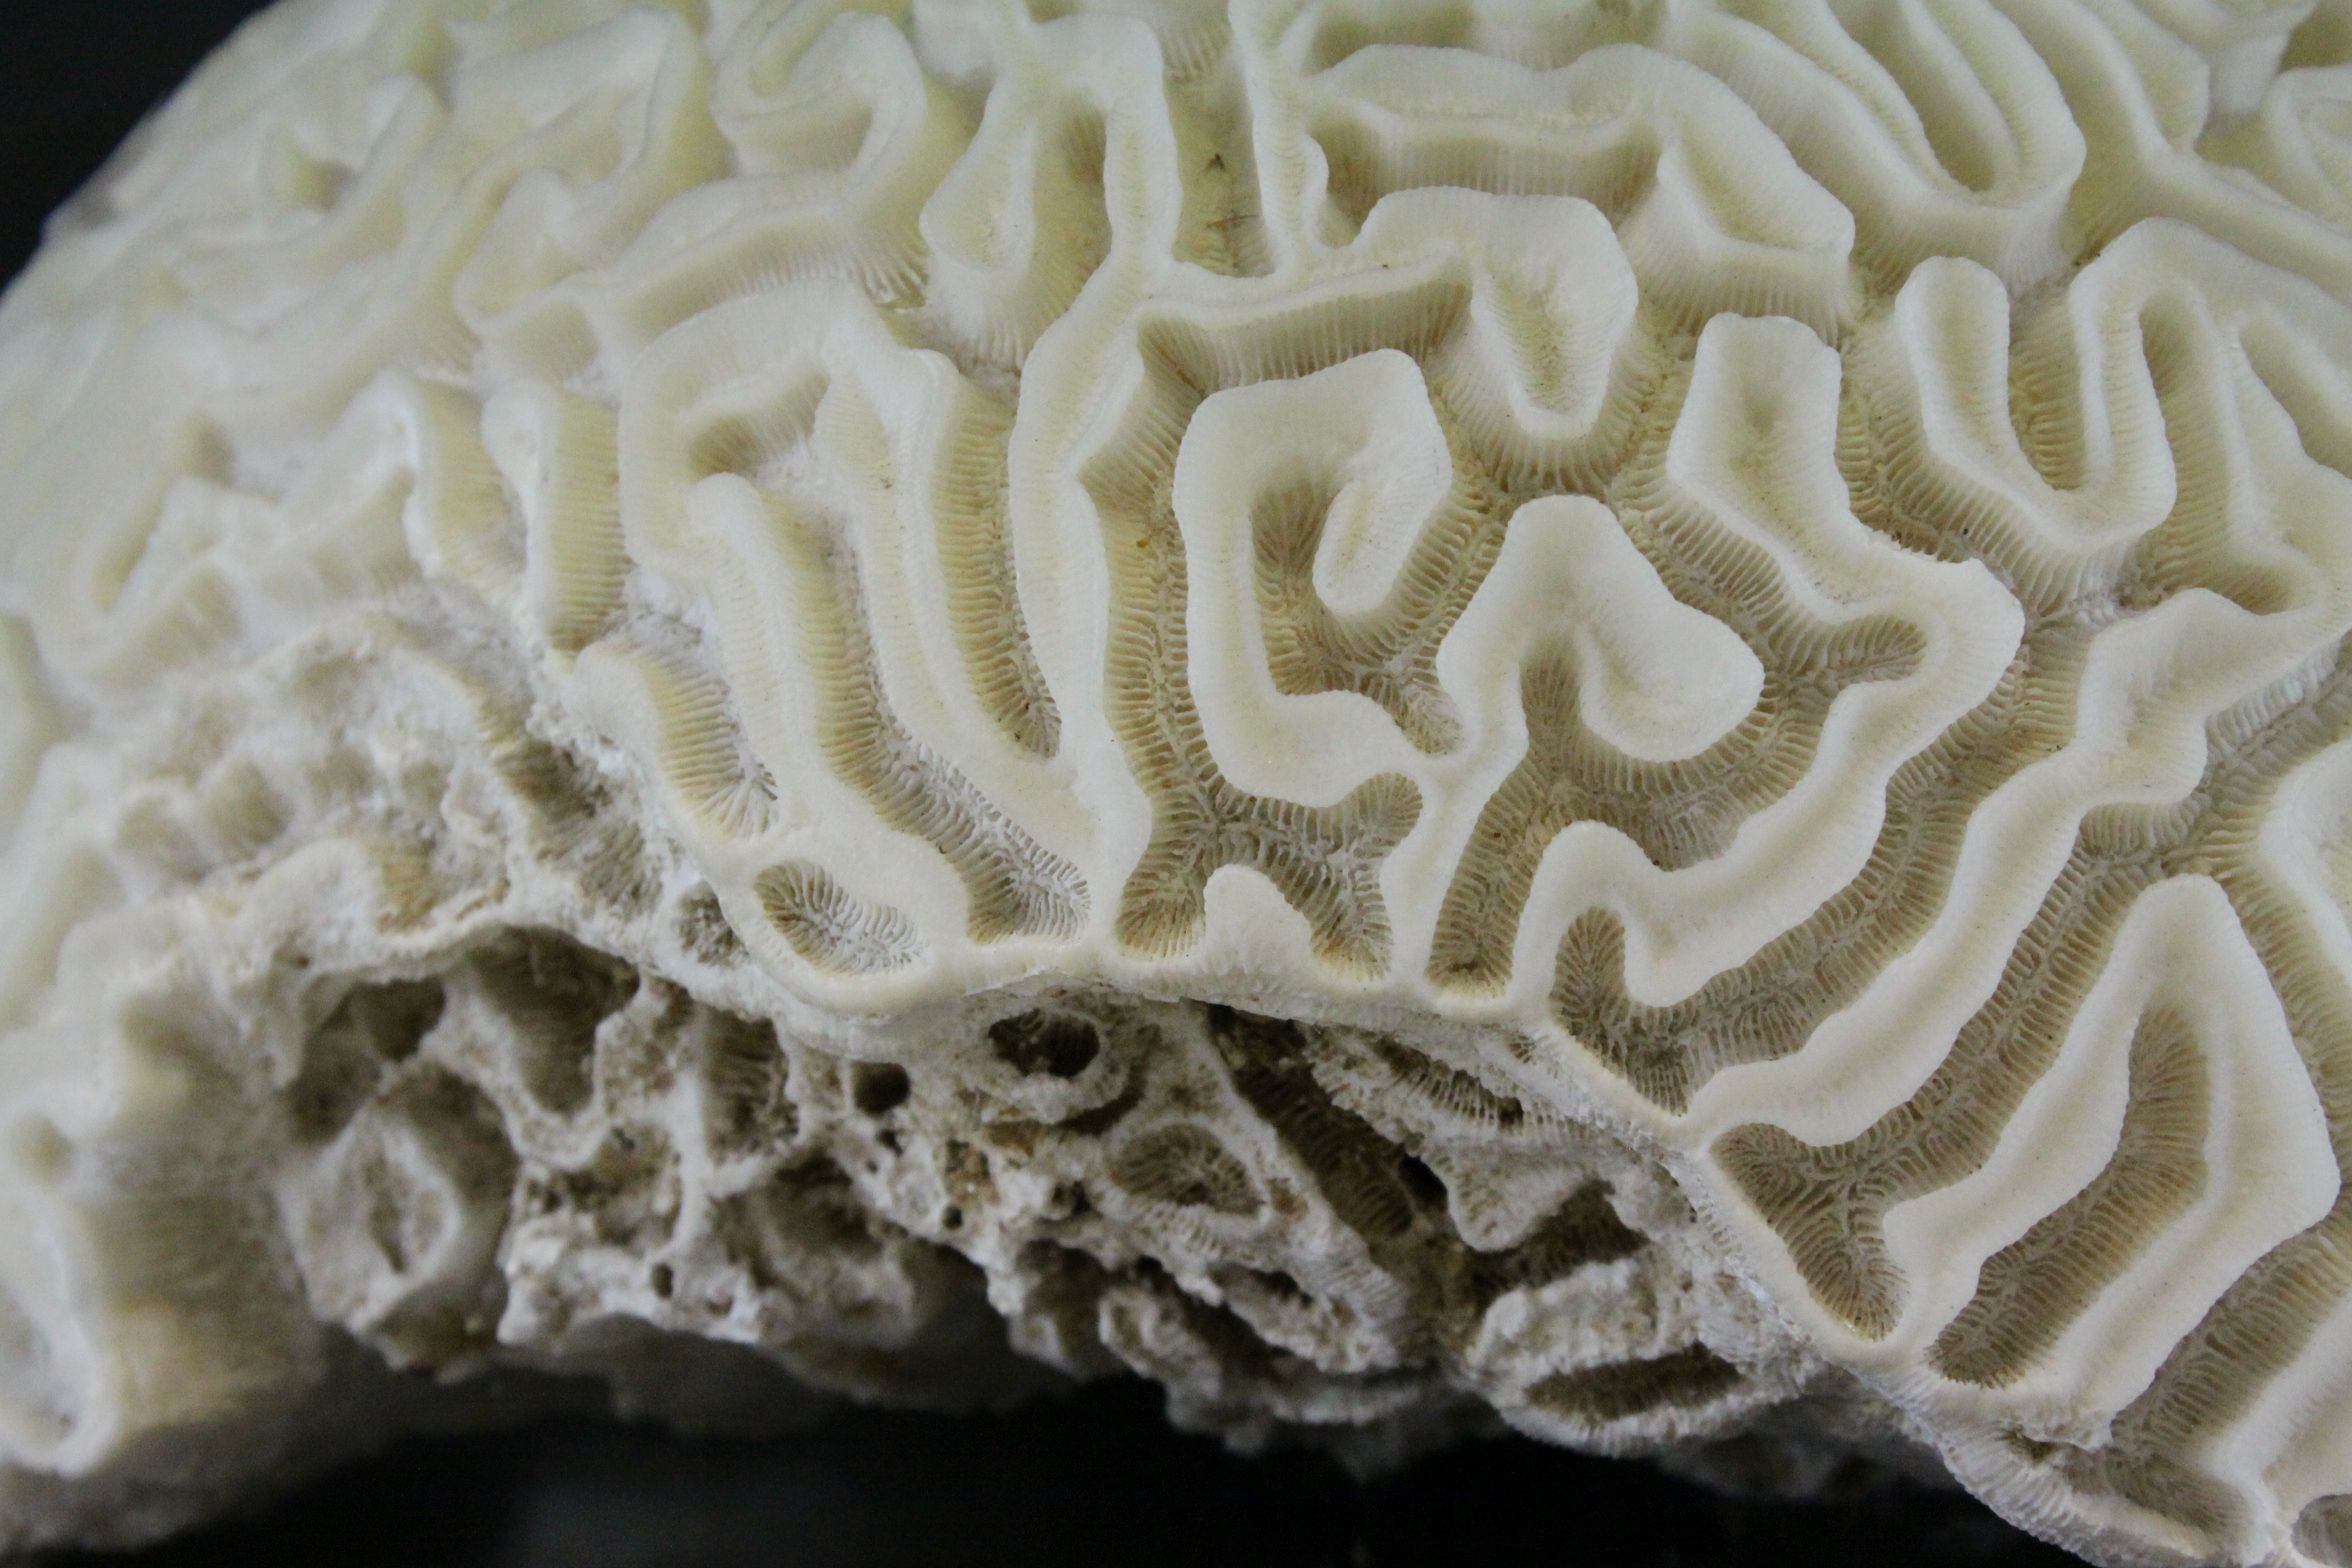 Large Brain Coral placed on a Wooden Stand, d.28cms - Image 2 of 5